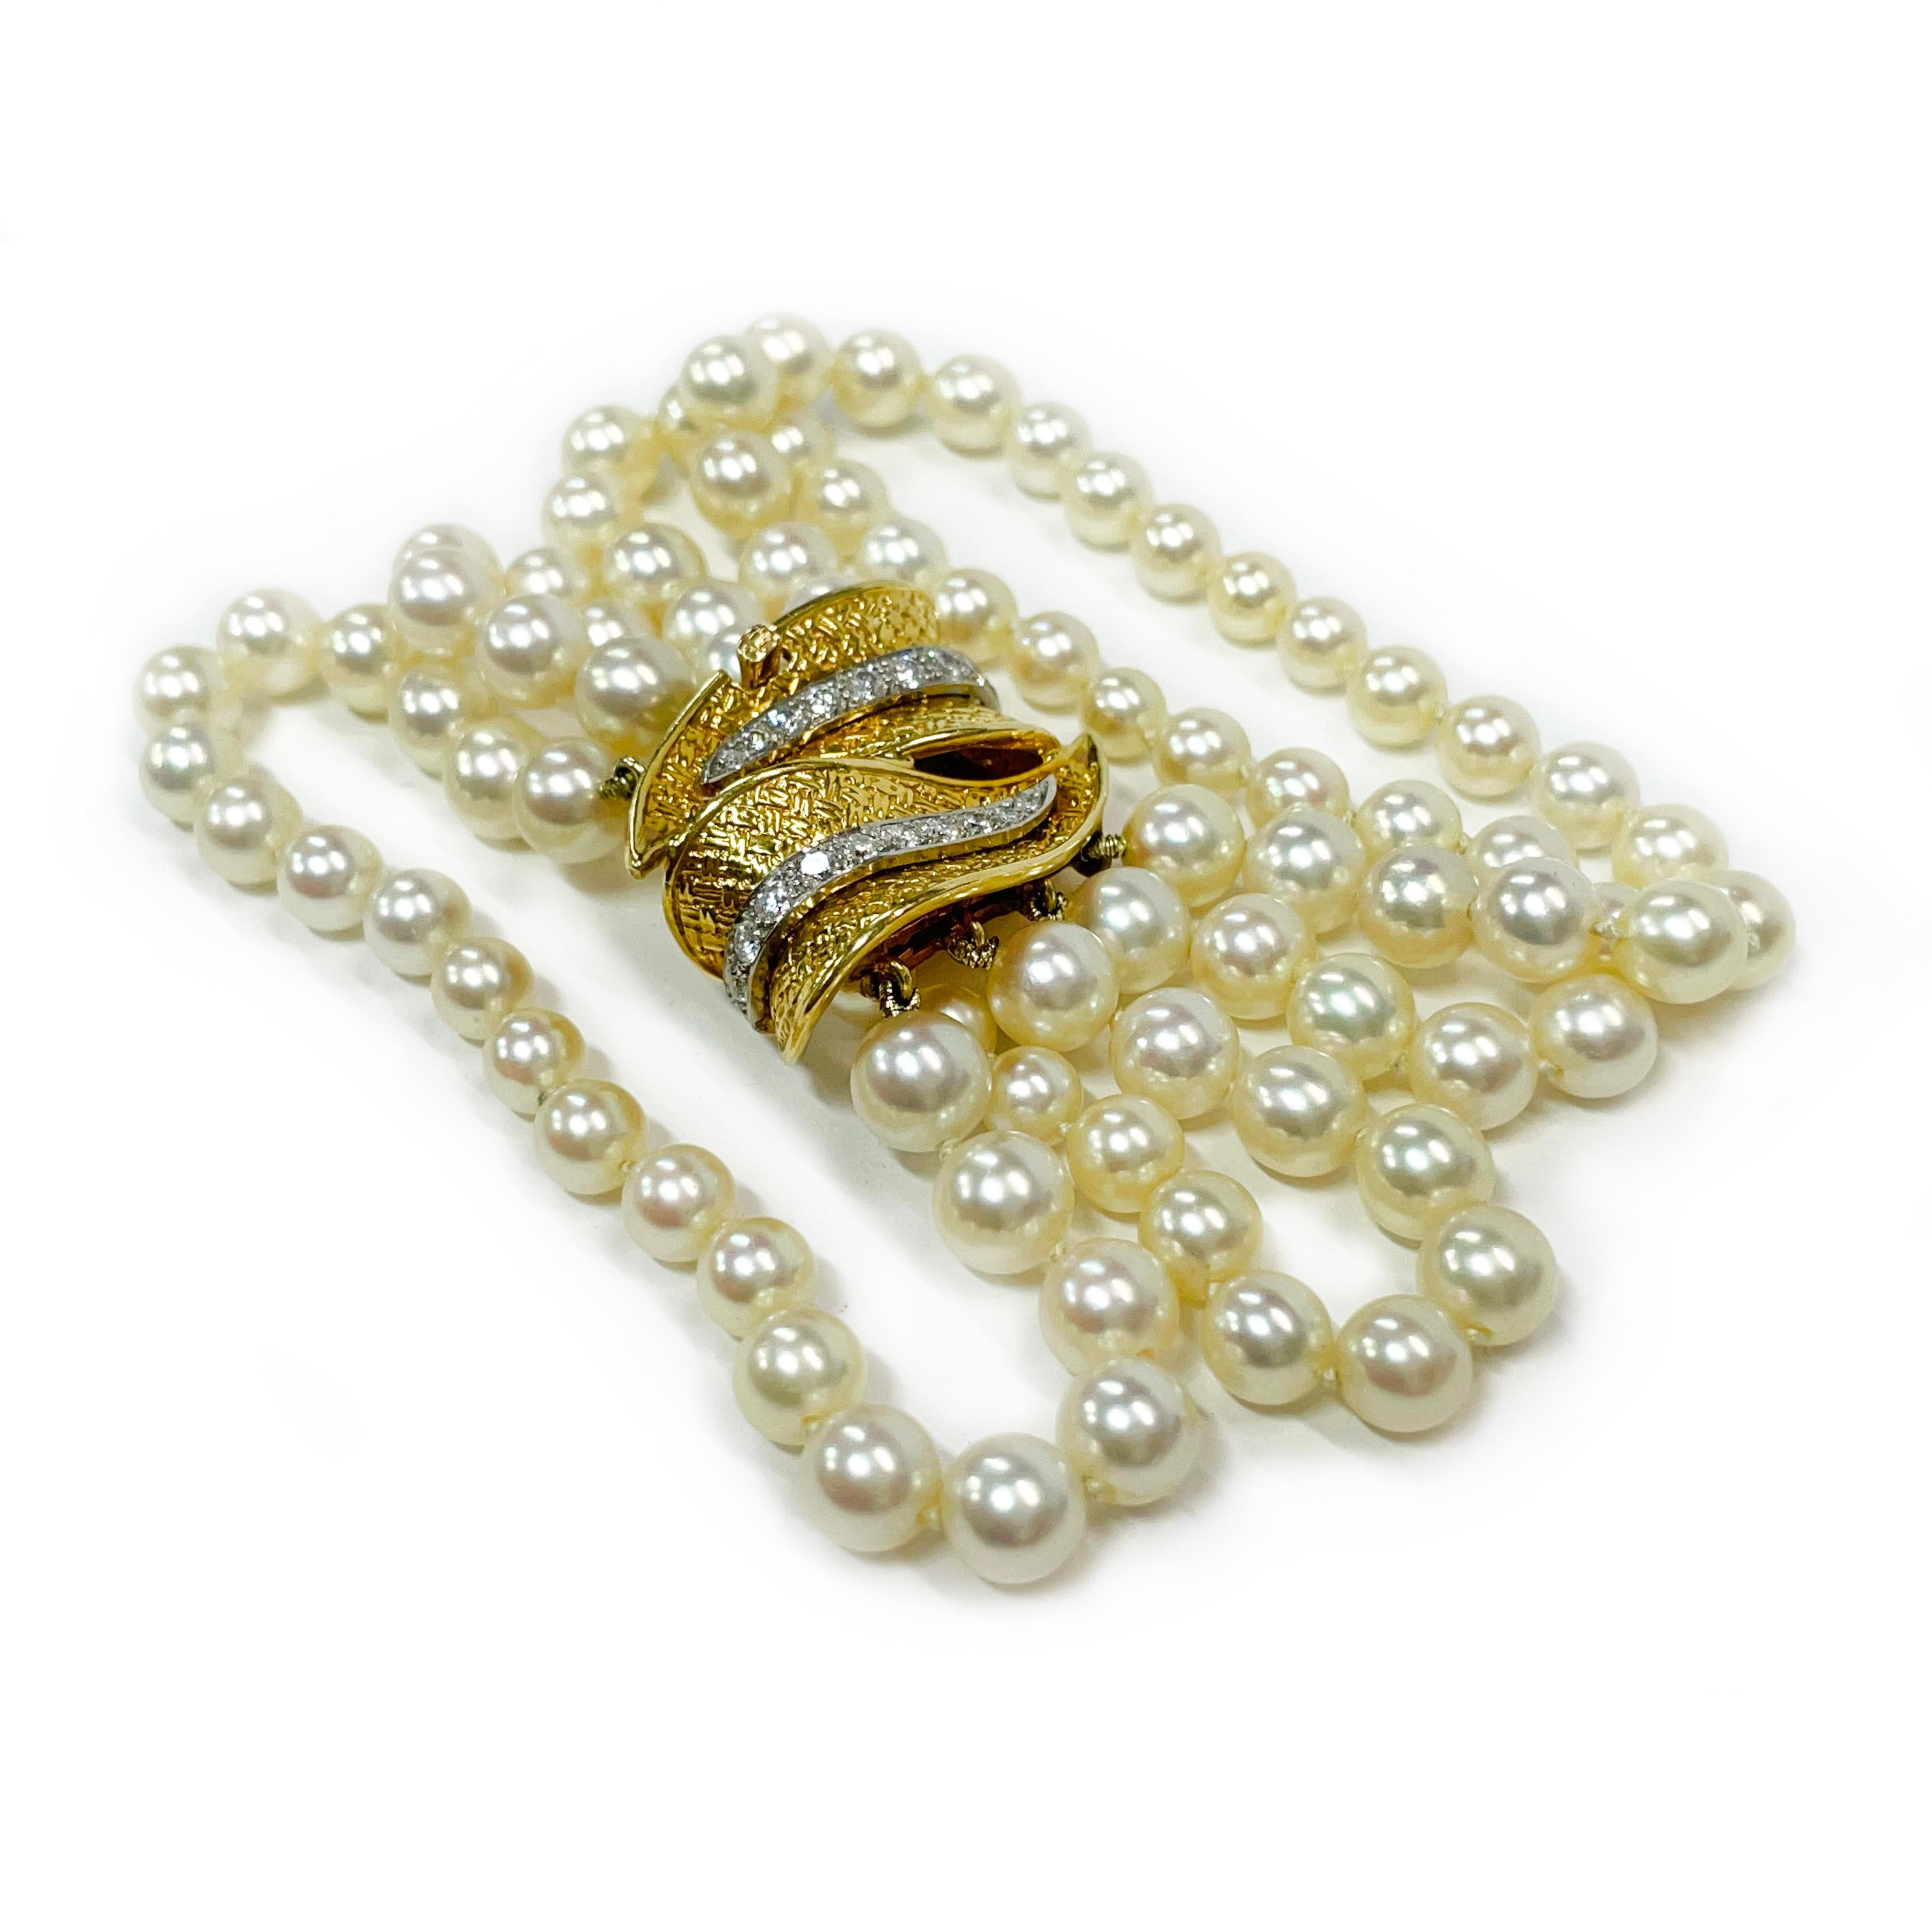 18 Karat Yellow Gold Platinum Four-Strand Pearl Diamond Bracelet. Absolutely lovely four-strand pearl bracelet with a double yellow gold leaf design with diamond accents set in platinum. The bracelet features twenty diamonds ranging in size from